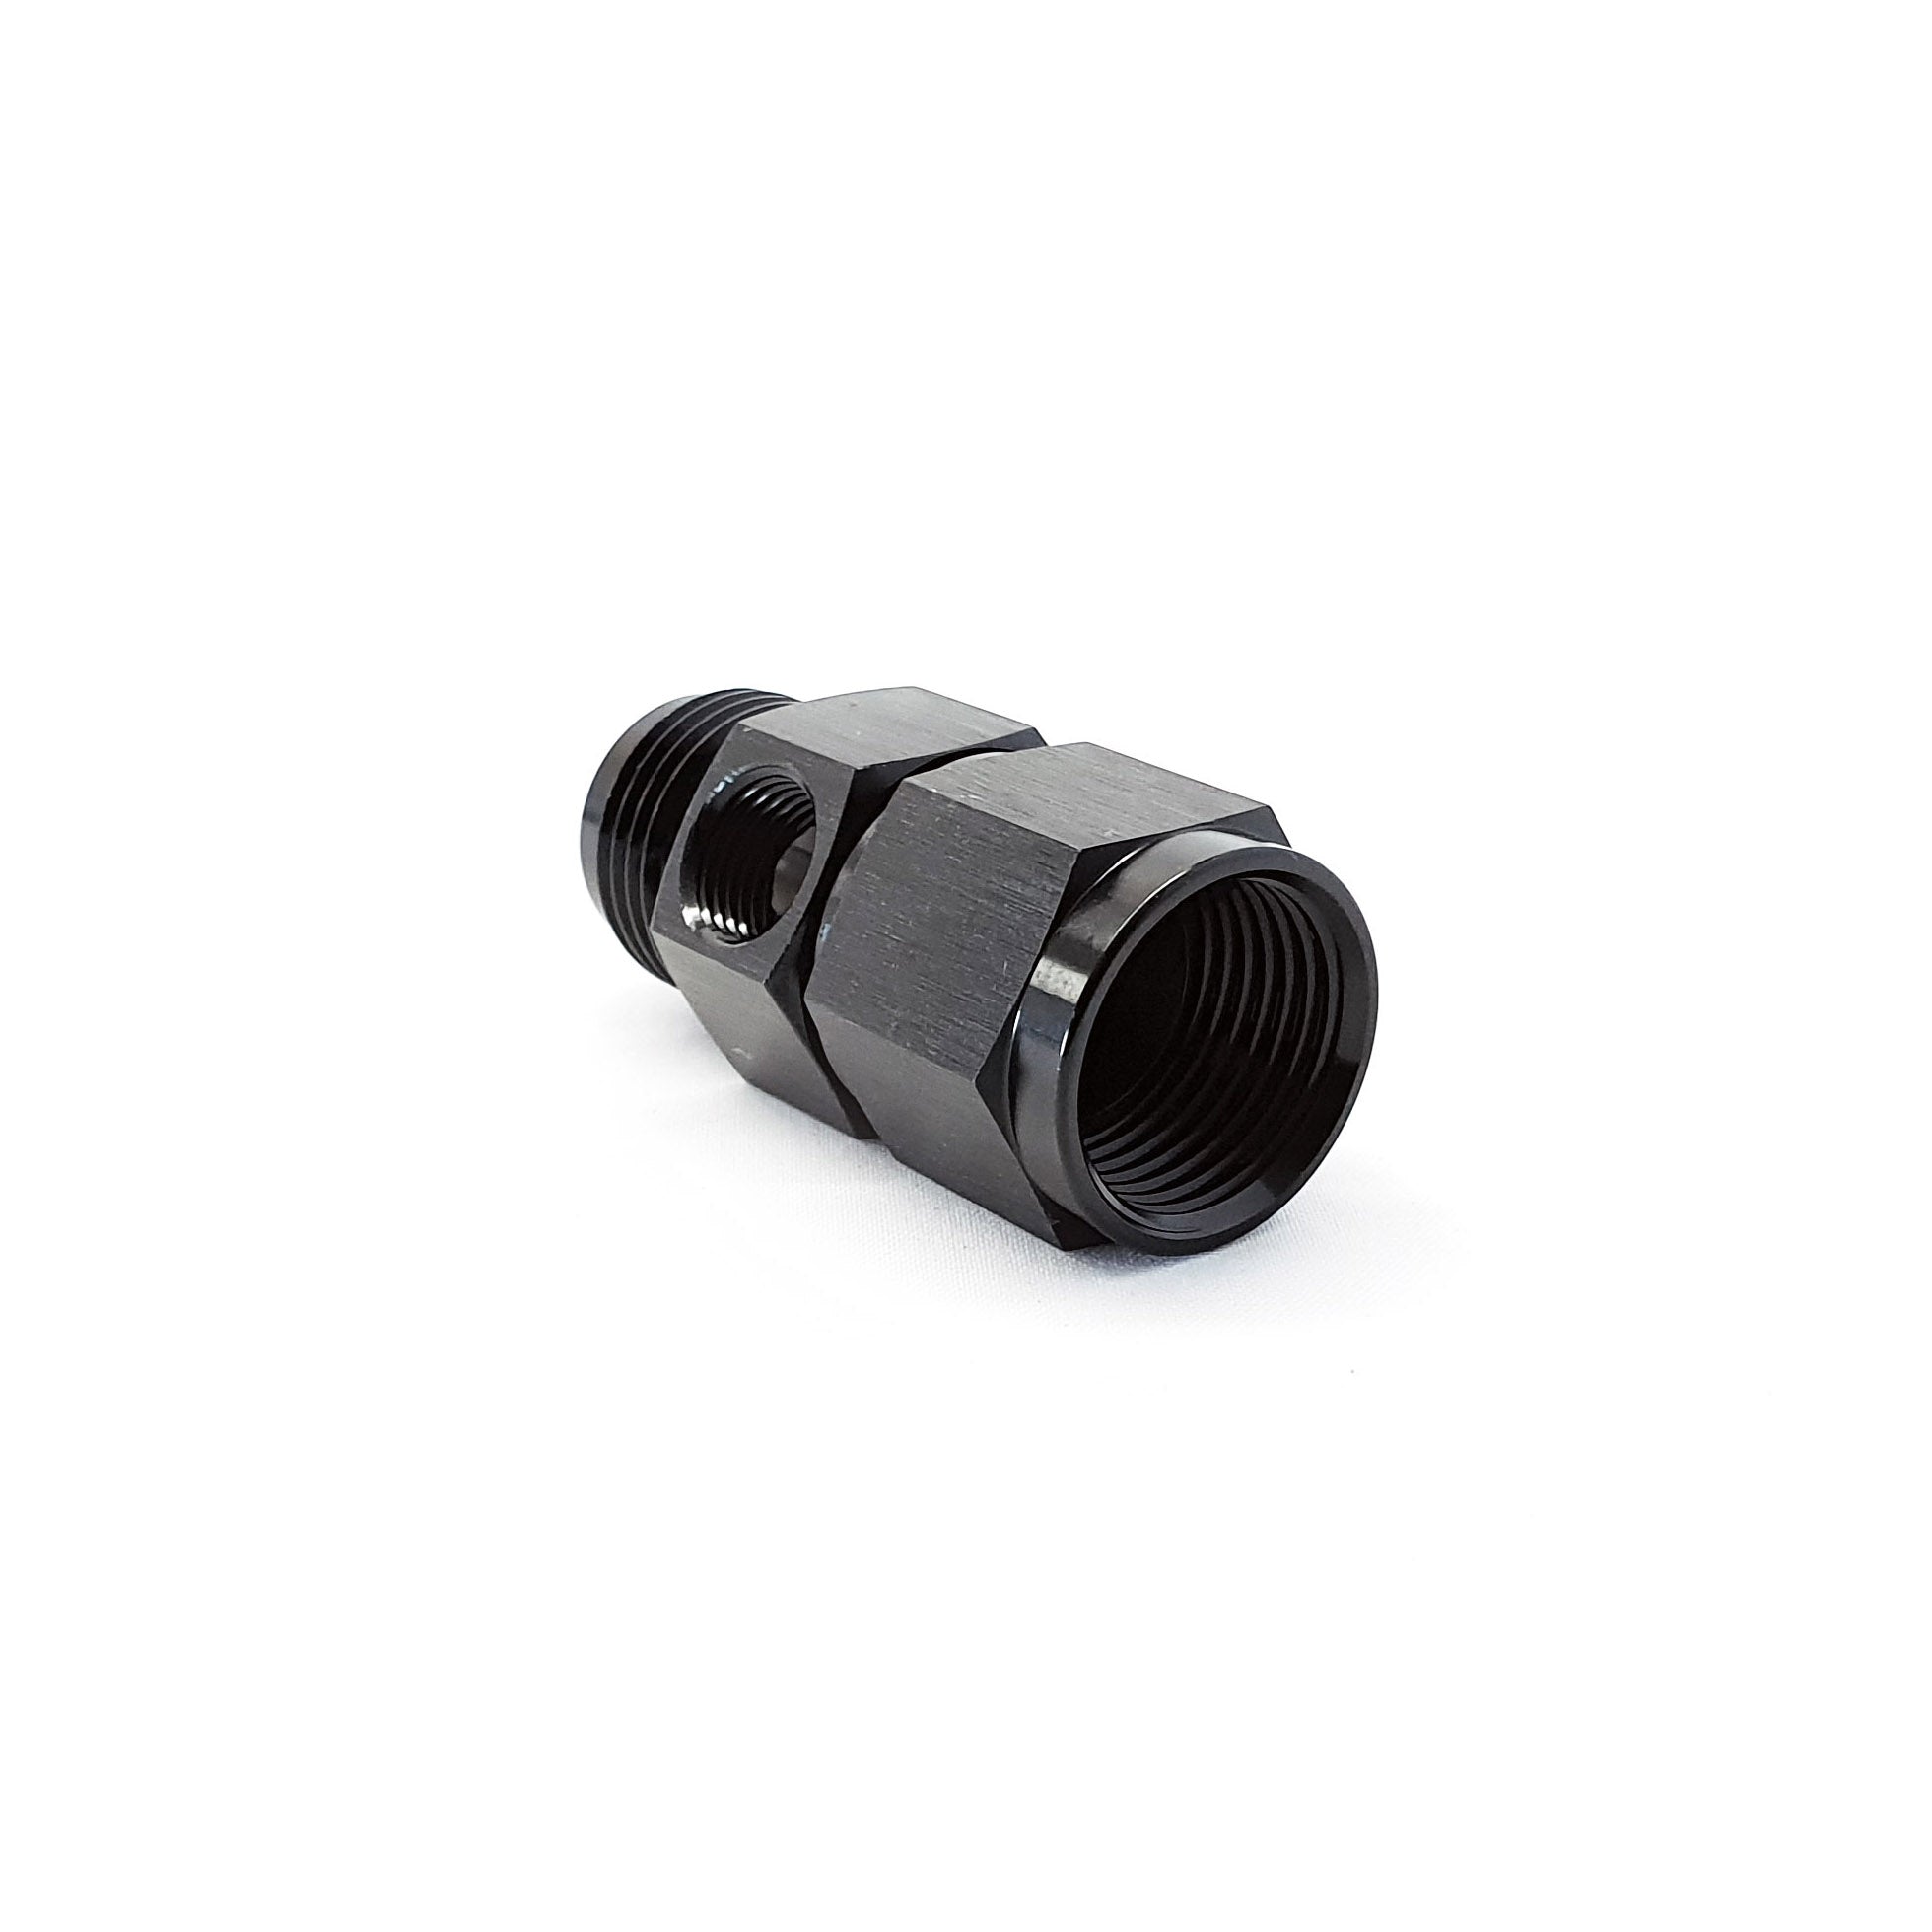 STRAIGHT FEMALE/MALE FITTINGS WITH 1/8" NPT PRO-S PORT